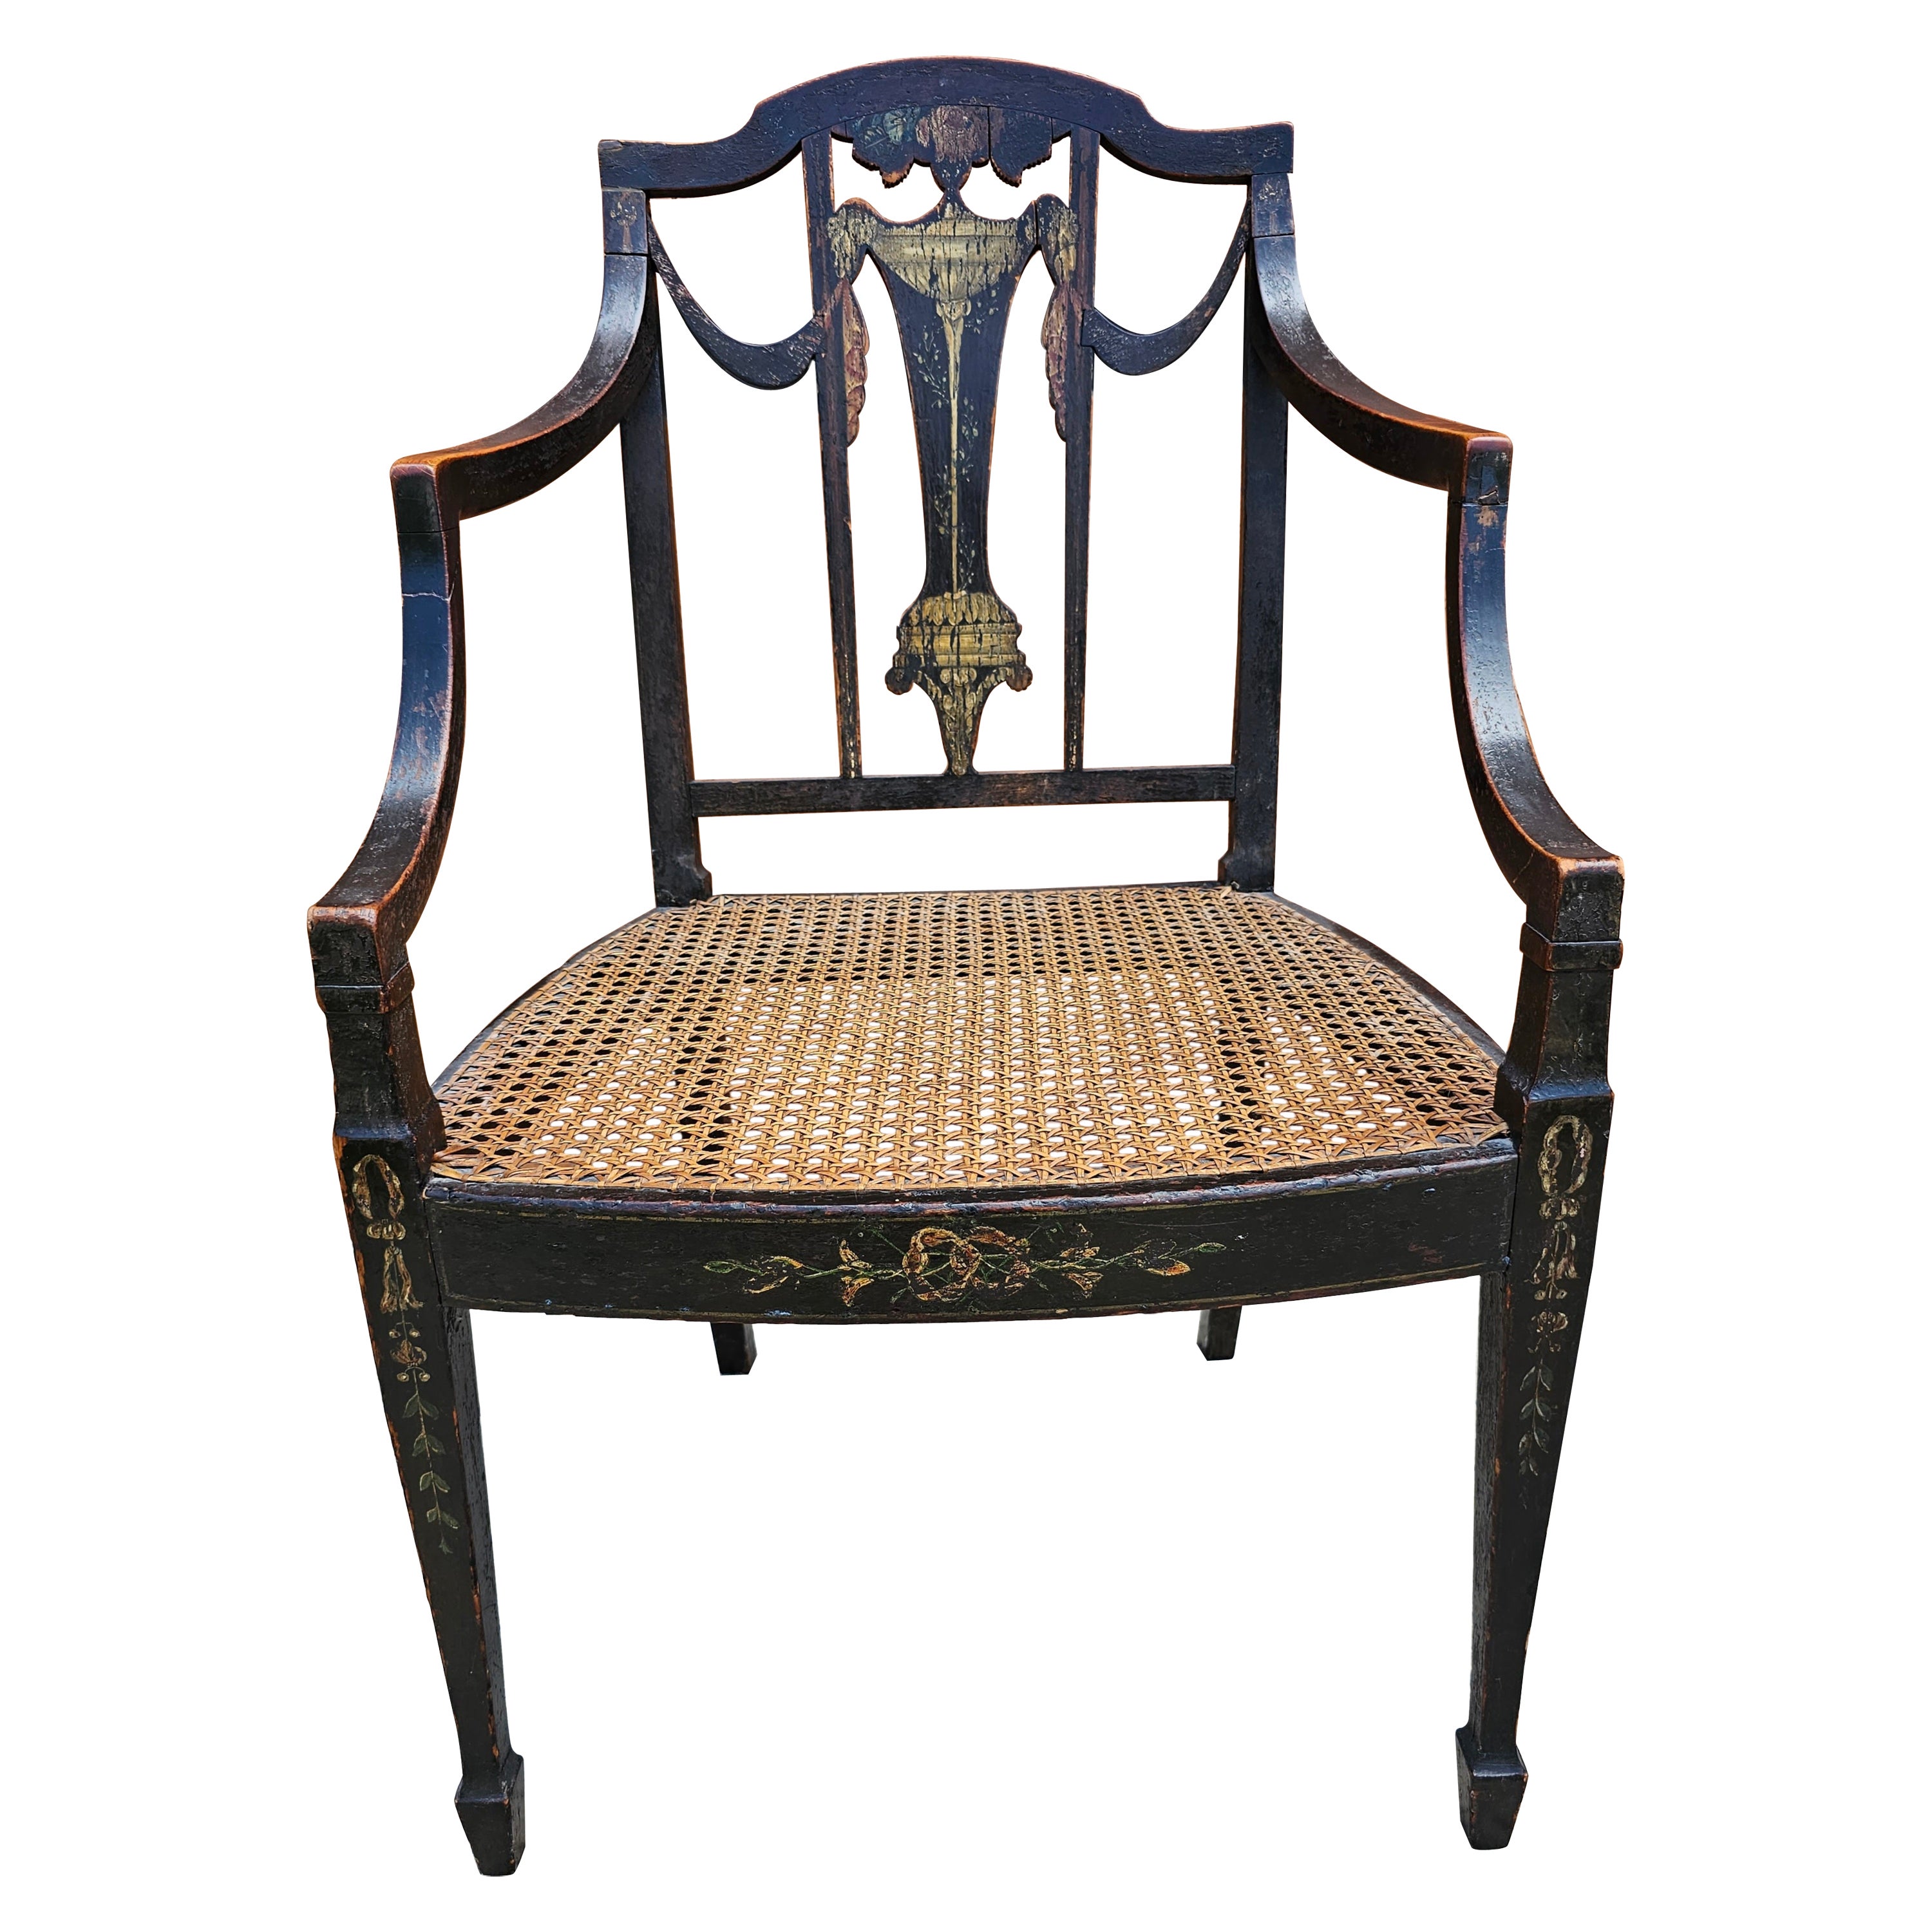 18th Century Ebonized and Inlays Decorated Cane Seat Armchair For Sale